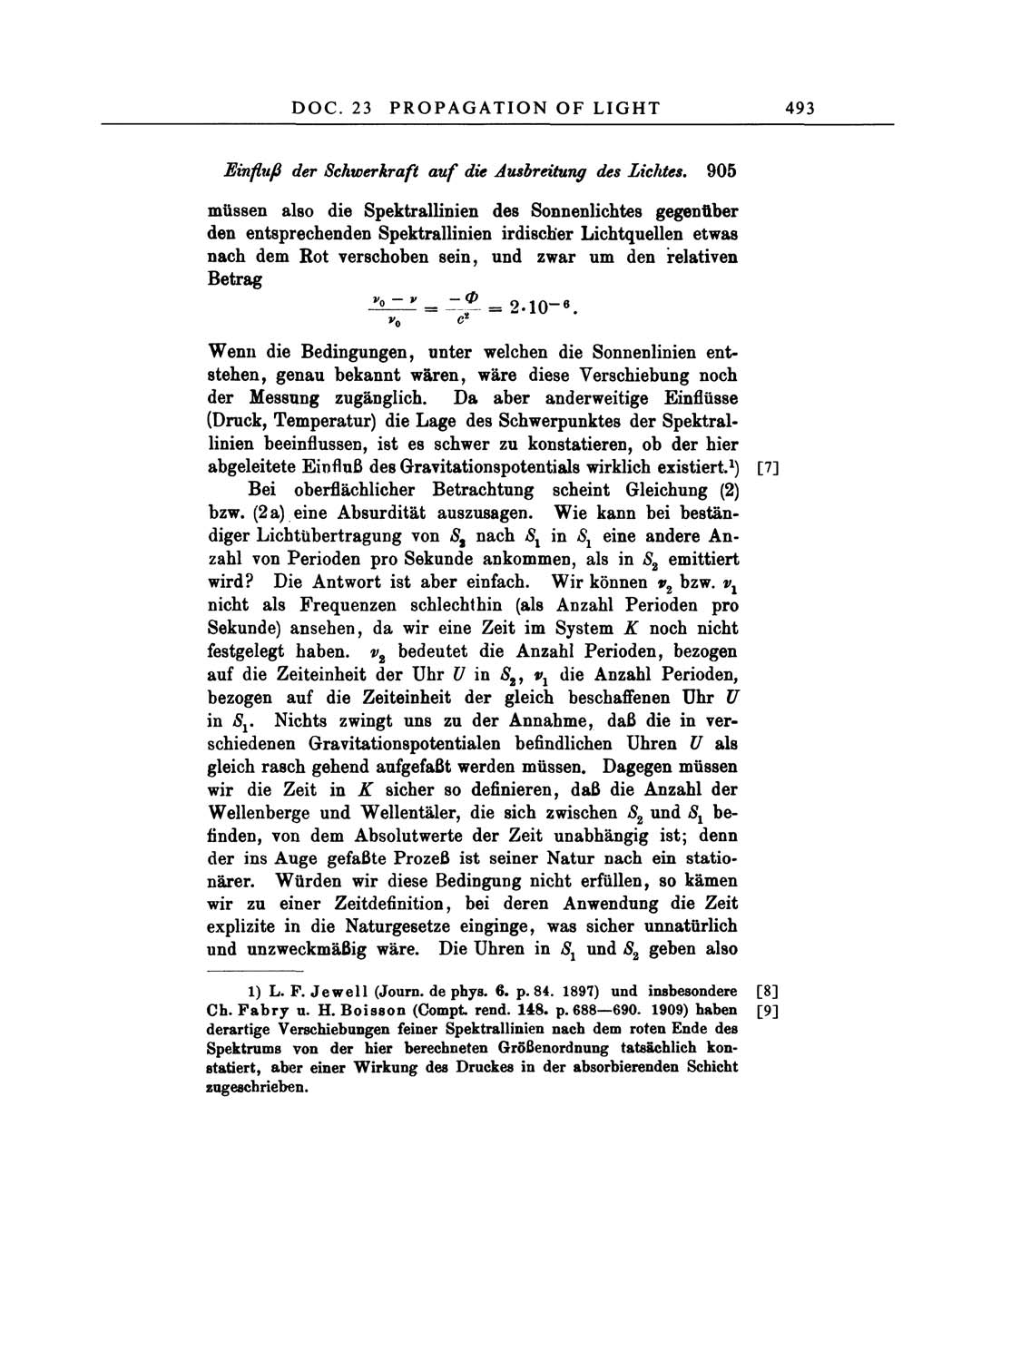 Volume 3: The Swiss Years: Writings 1909-1911 page 493